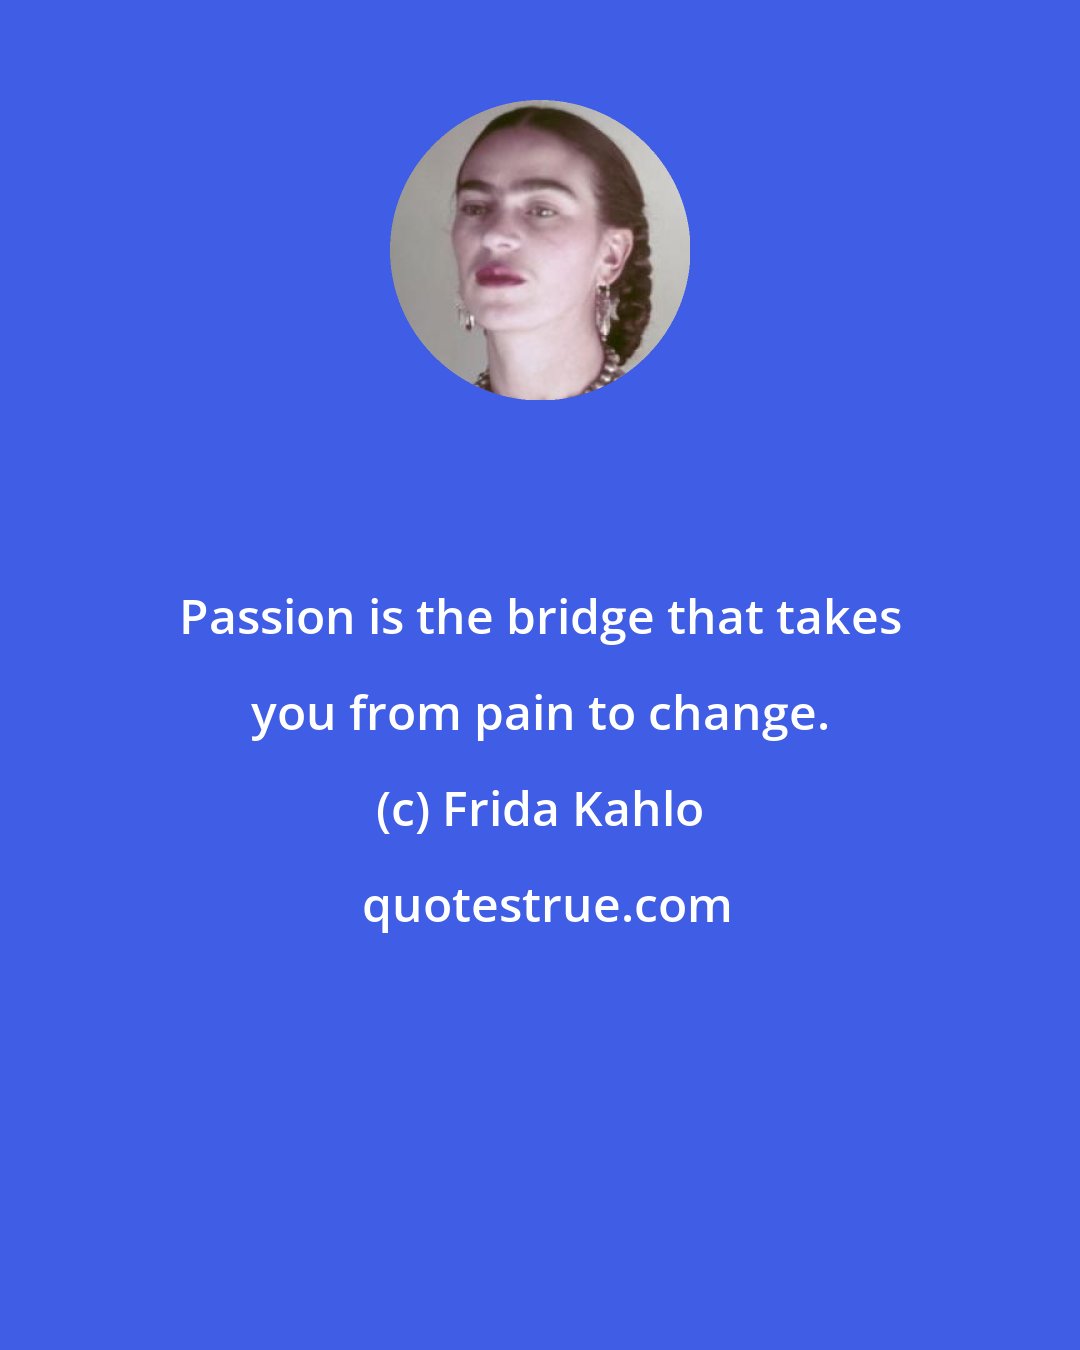 Frida Kahlo: Passion is the bridge that takes you from pain to change.